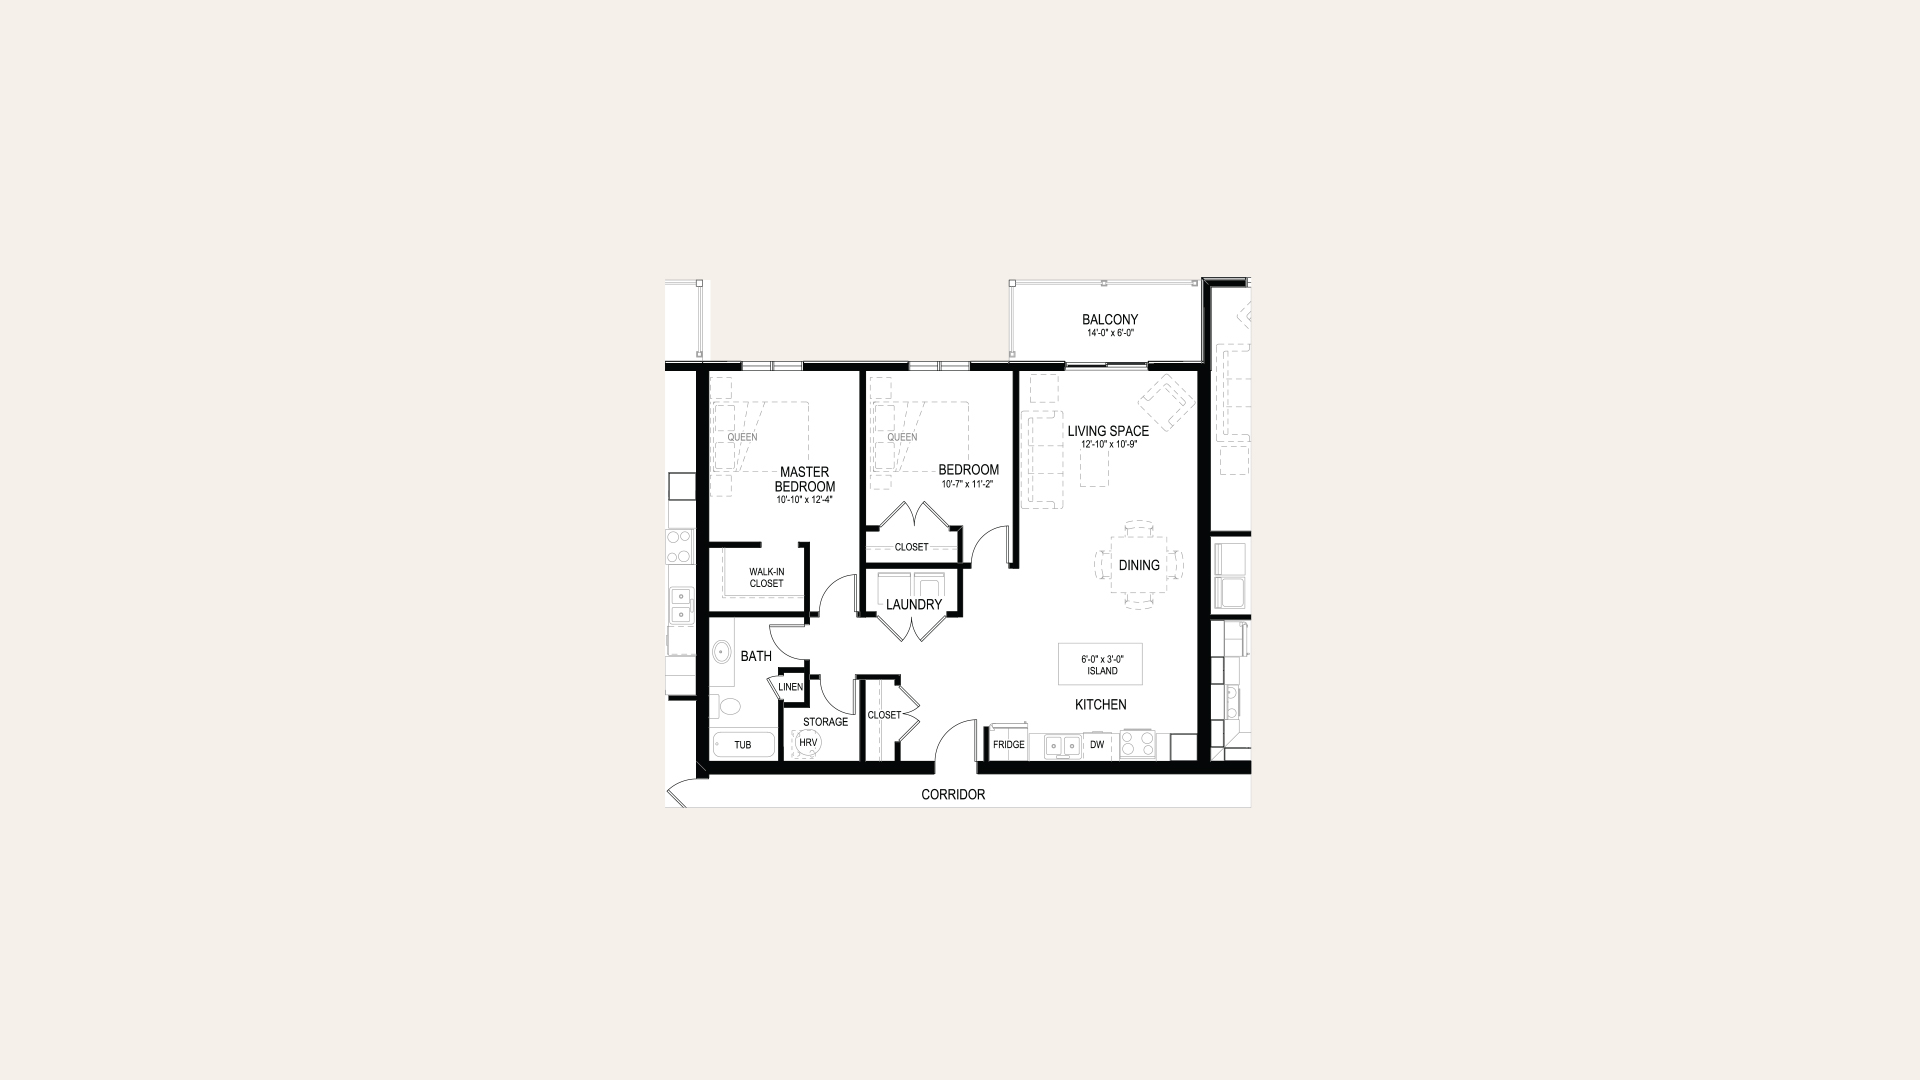 Floor plan of apartment C in Building B. One master bedroom with a walk-in closet, one bedroom, one bathroom, laundry closet, balcony, and an open concept kitchen and living room.